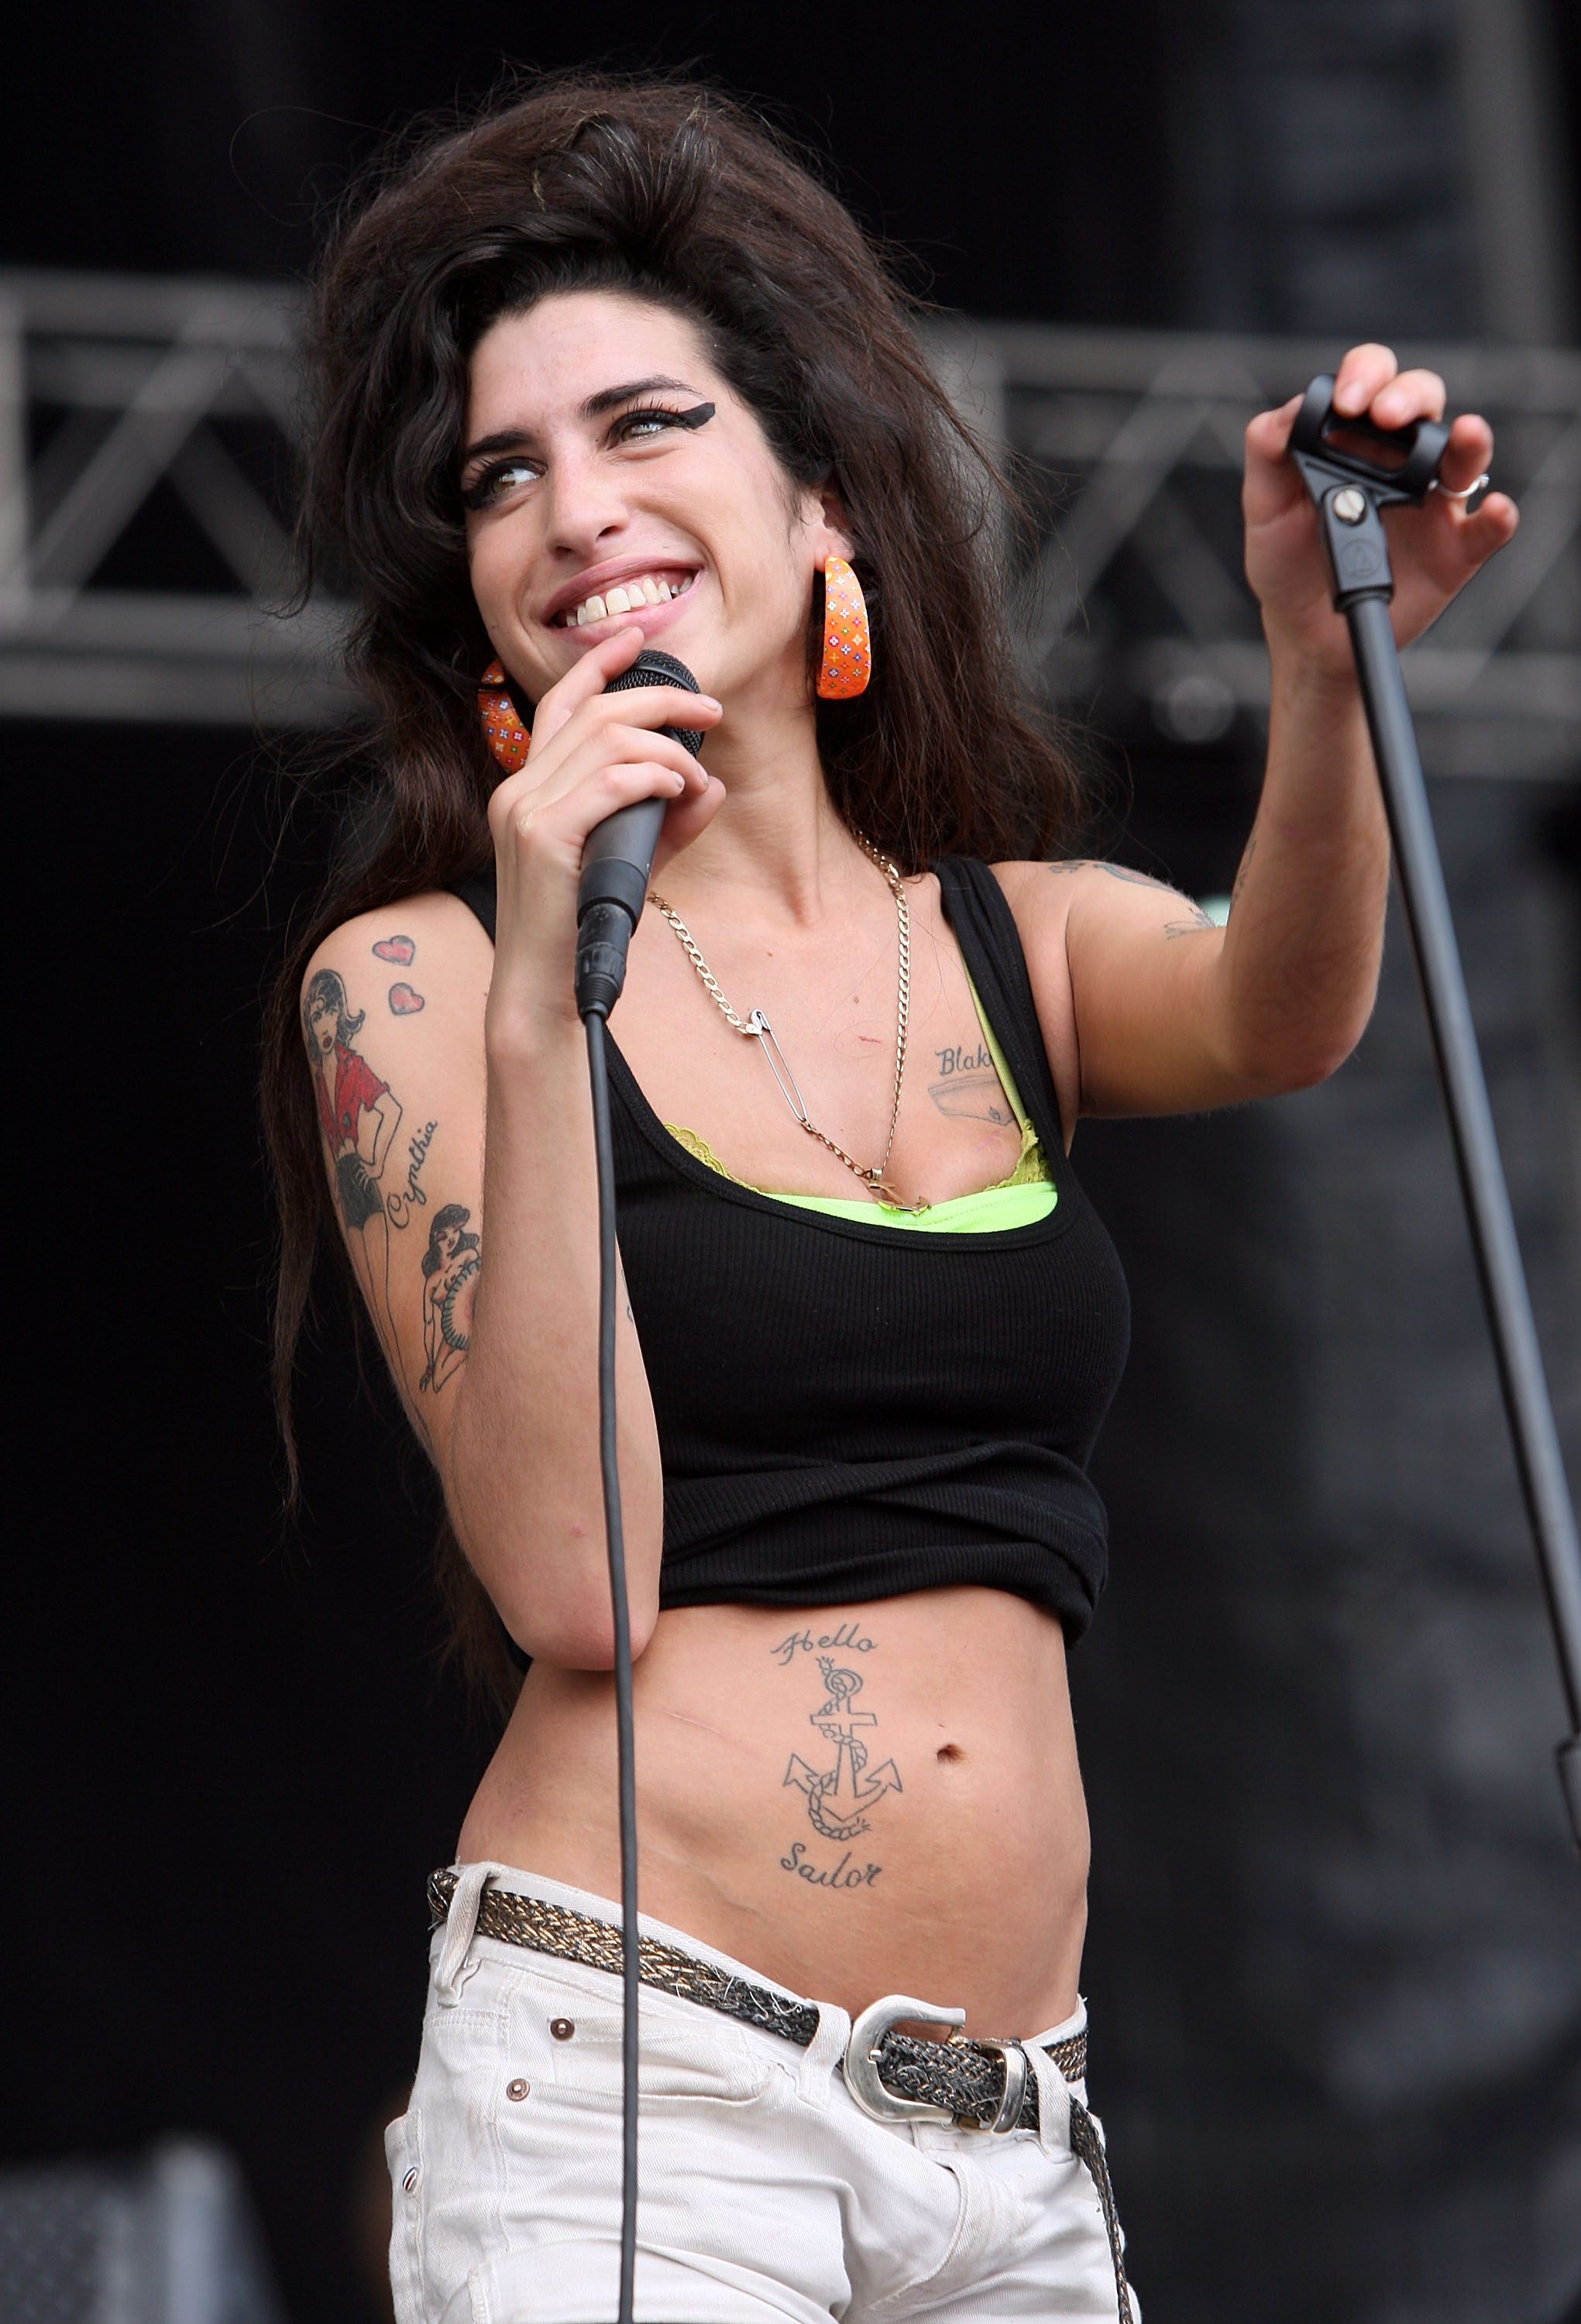 Rest in Peace Amy your music